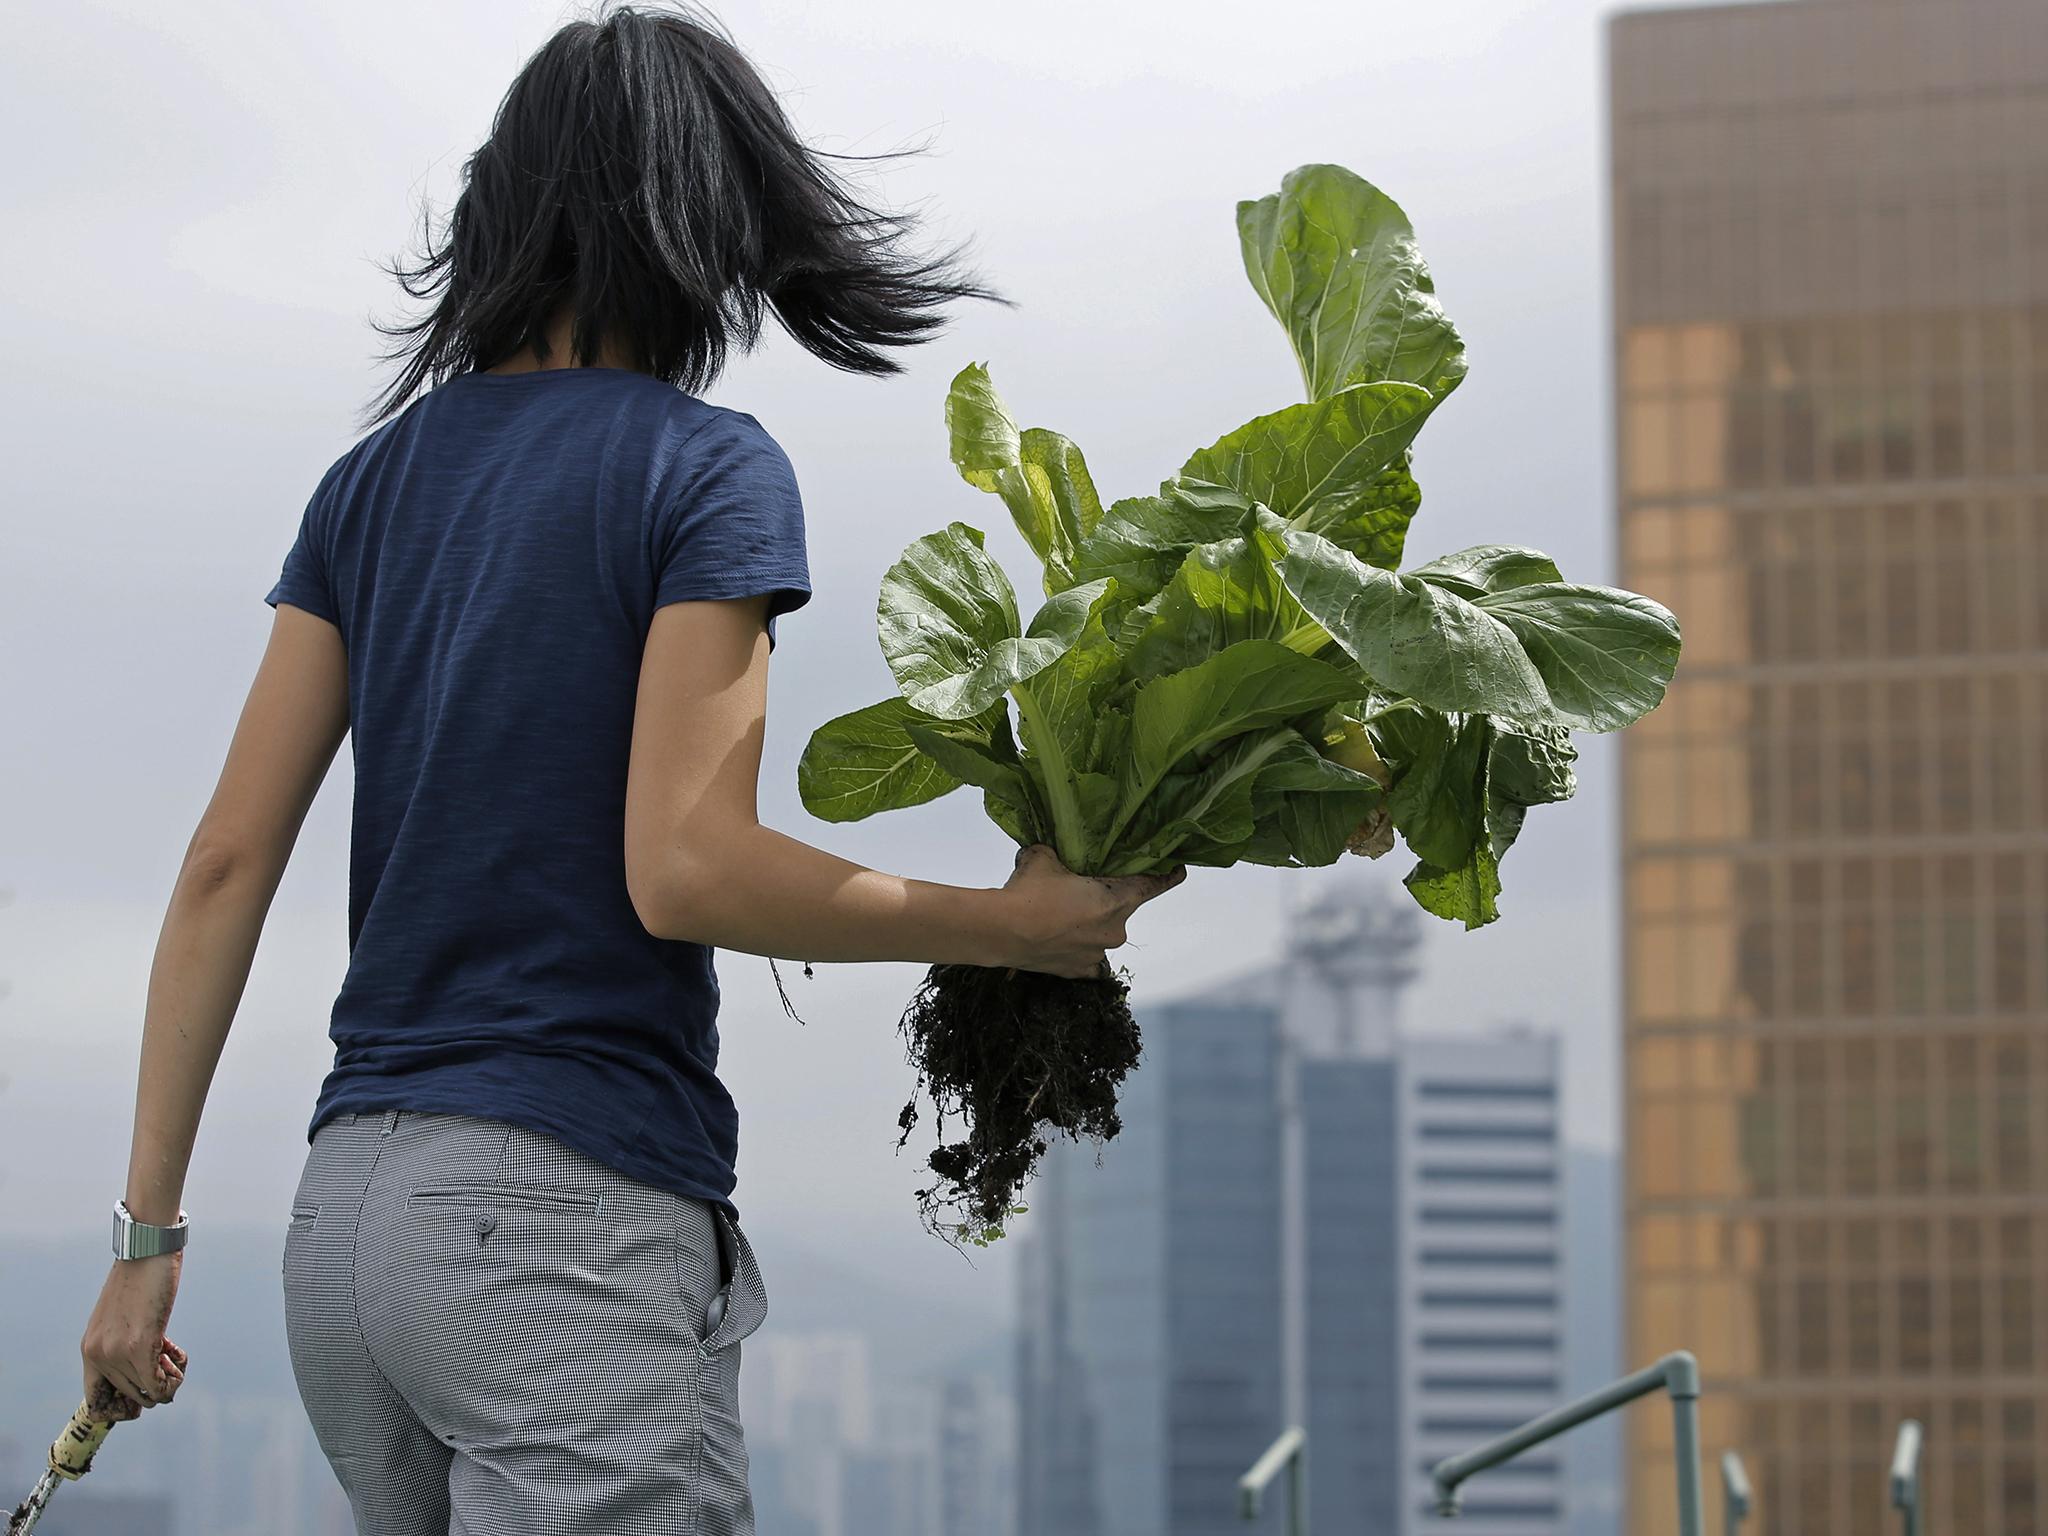 Research shows there is around 1,500 rooftop farmers in the city, cultivating a total area of around 1½ hectares